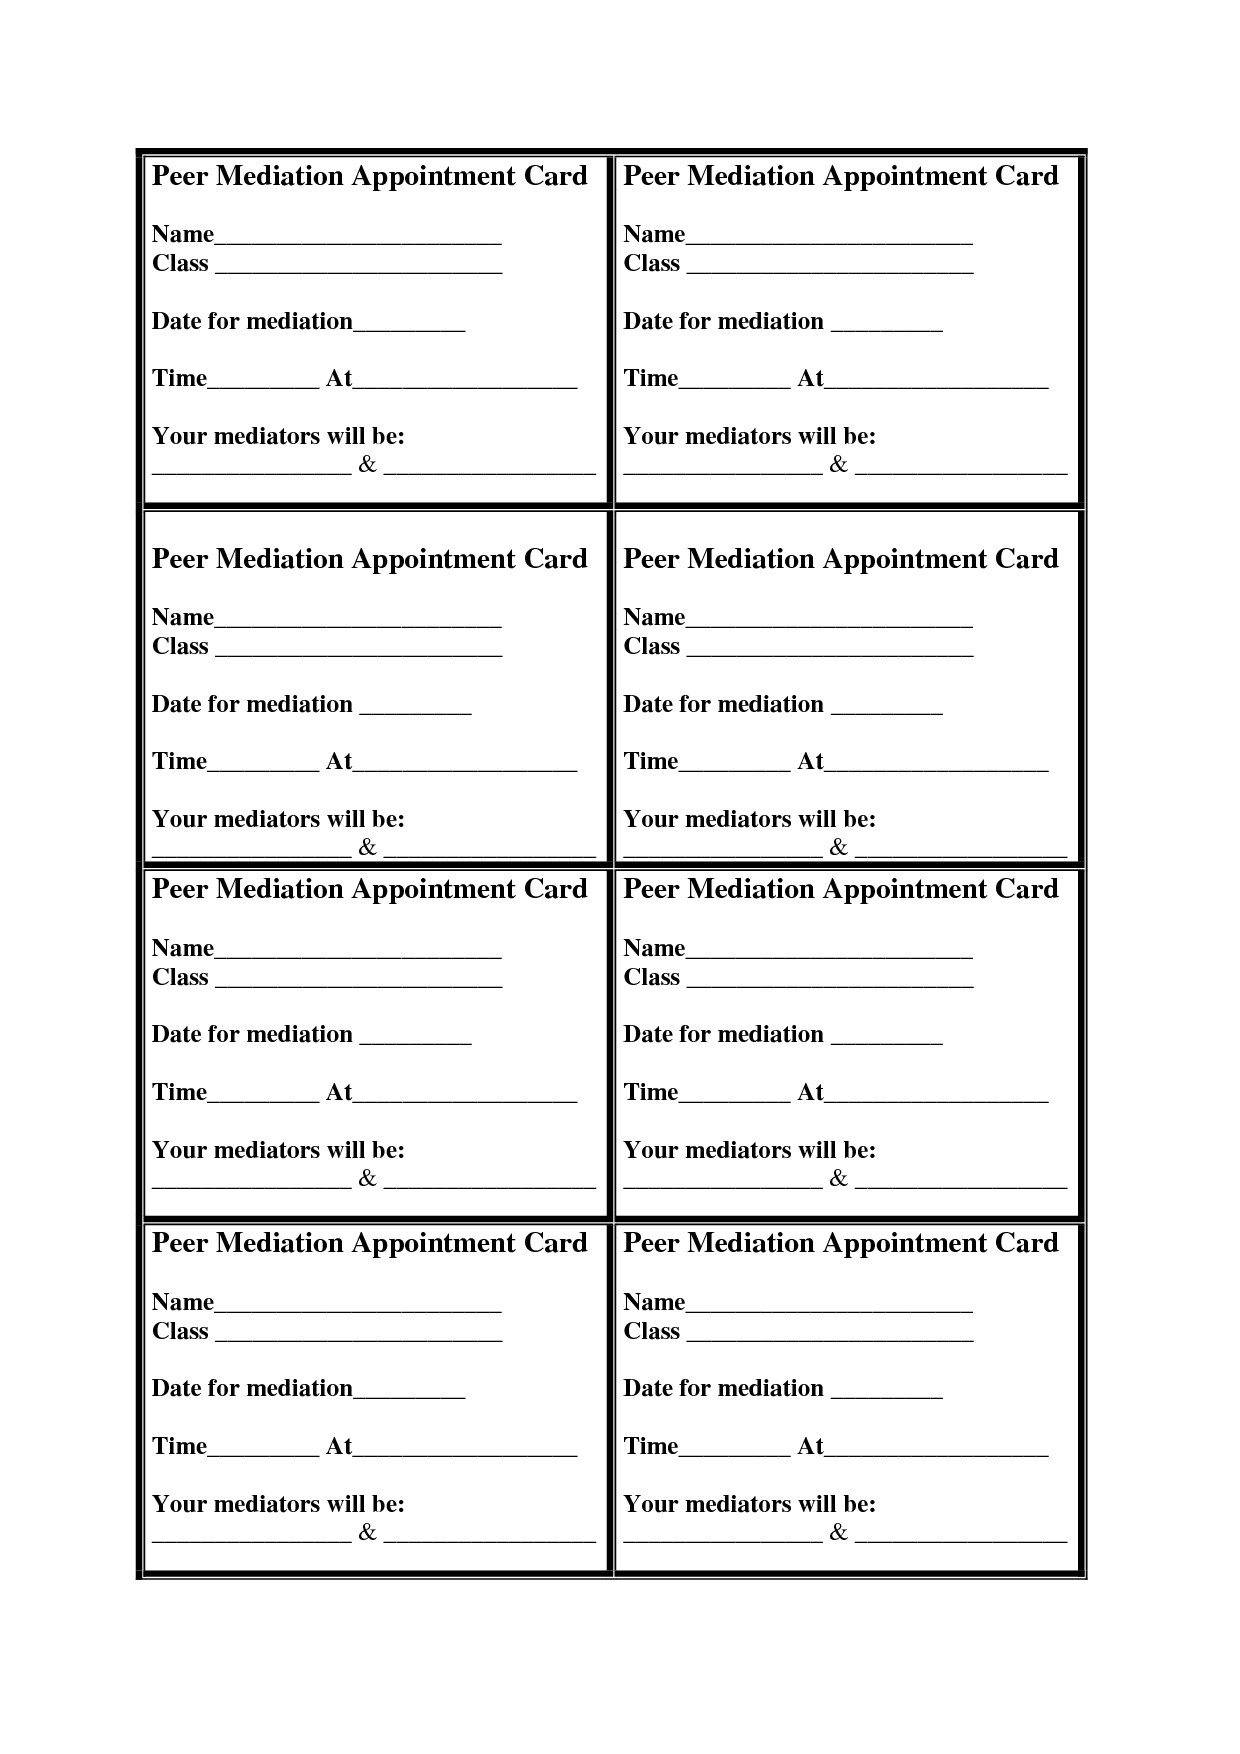 Medical Appointment Card Template Free ] – Appointment Card Within Medical Appointment Card Template Free